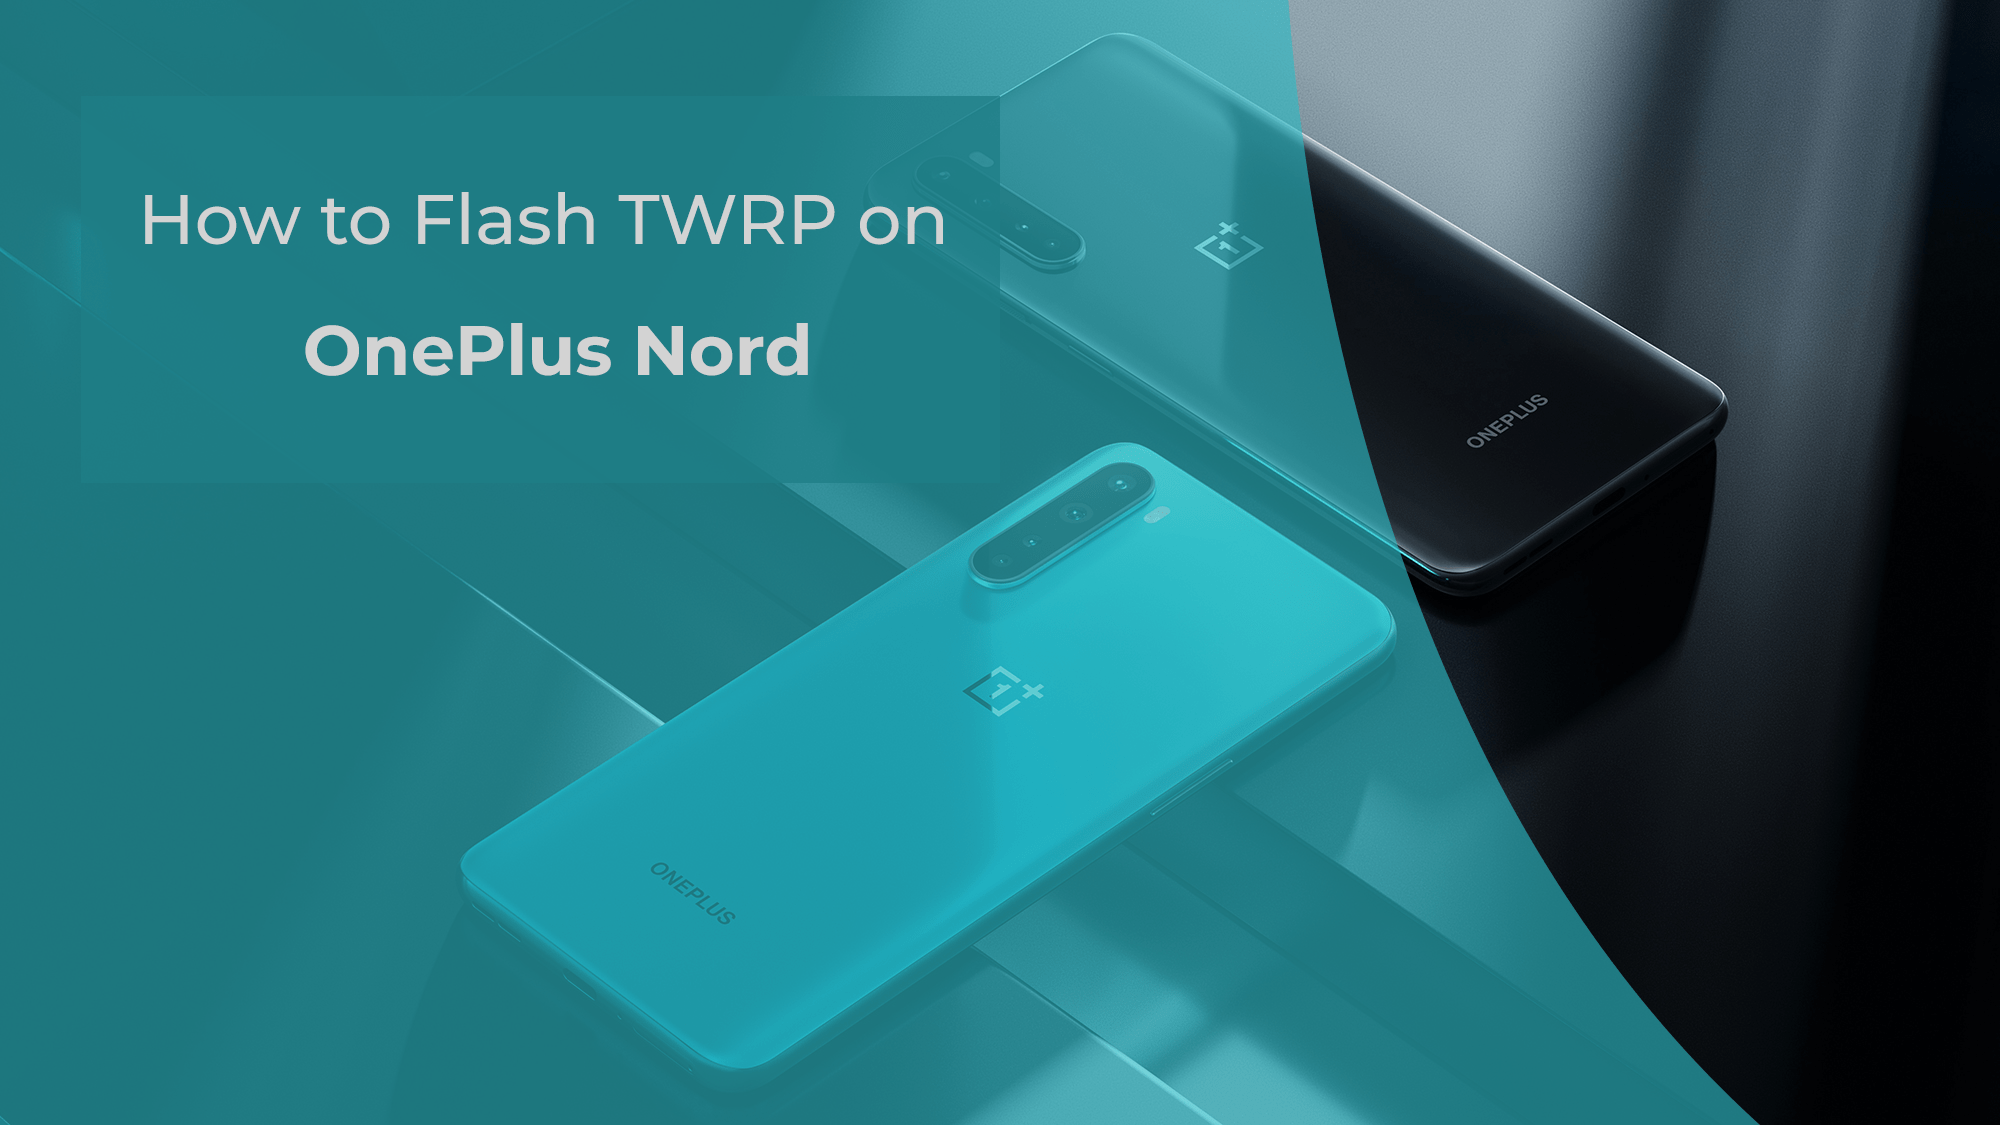 How to Flash TWRP on OnePlus Nord